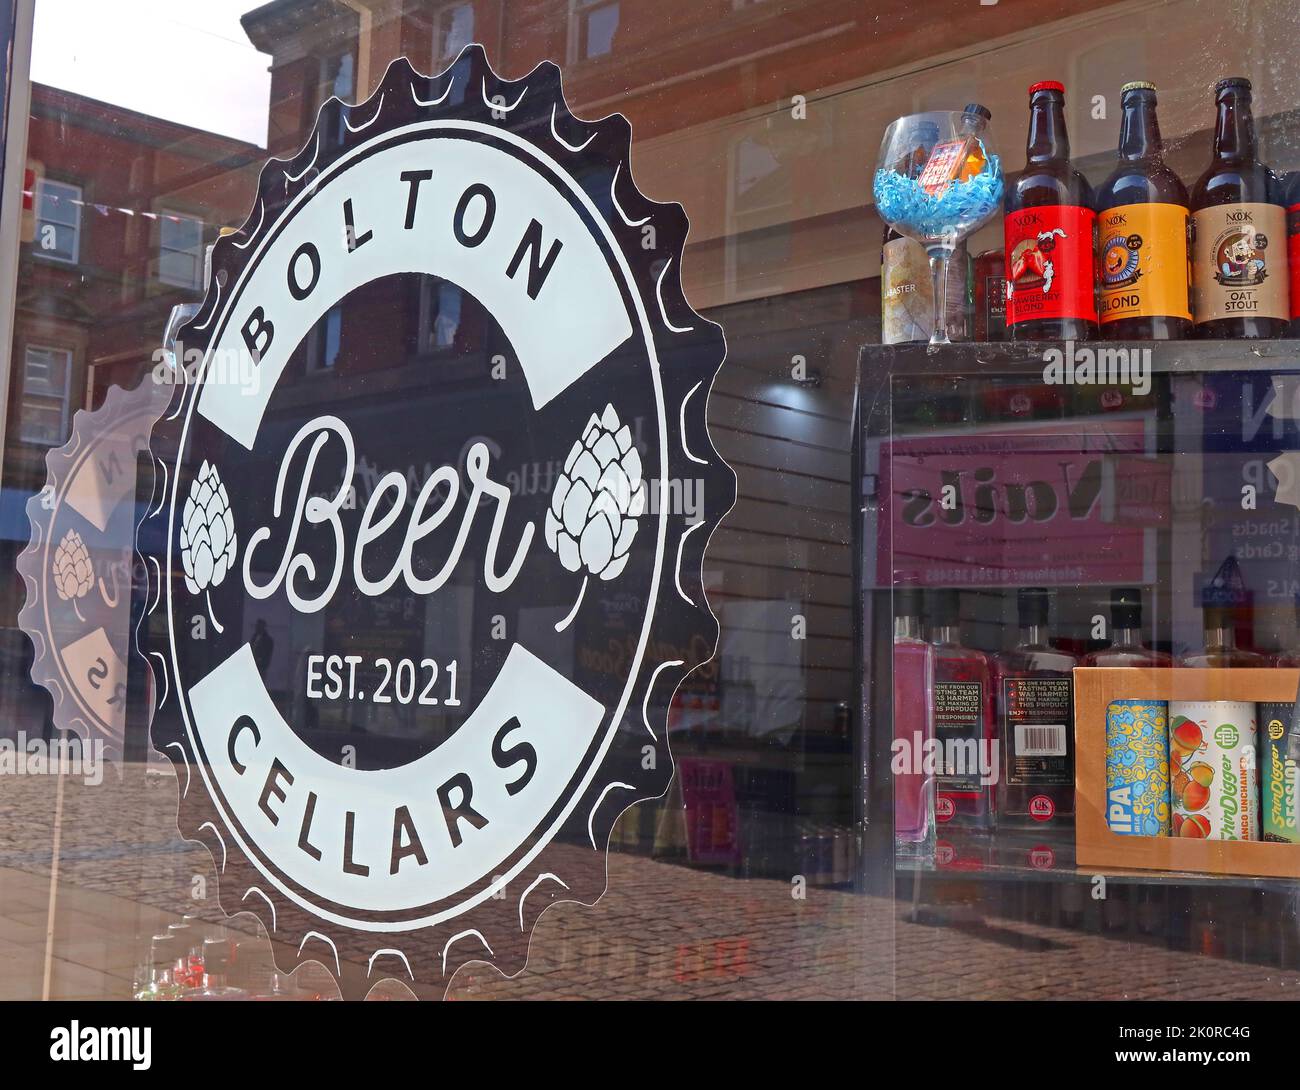 Bolton Beer Cellars, est 2021, 22 Corporation St, Bolton, Greater Manchester, ANGLETERRE, ROYAUME-UNI, BL1 2AN Banque D'Images